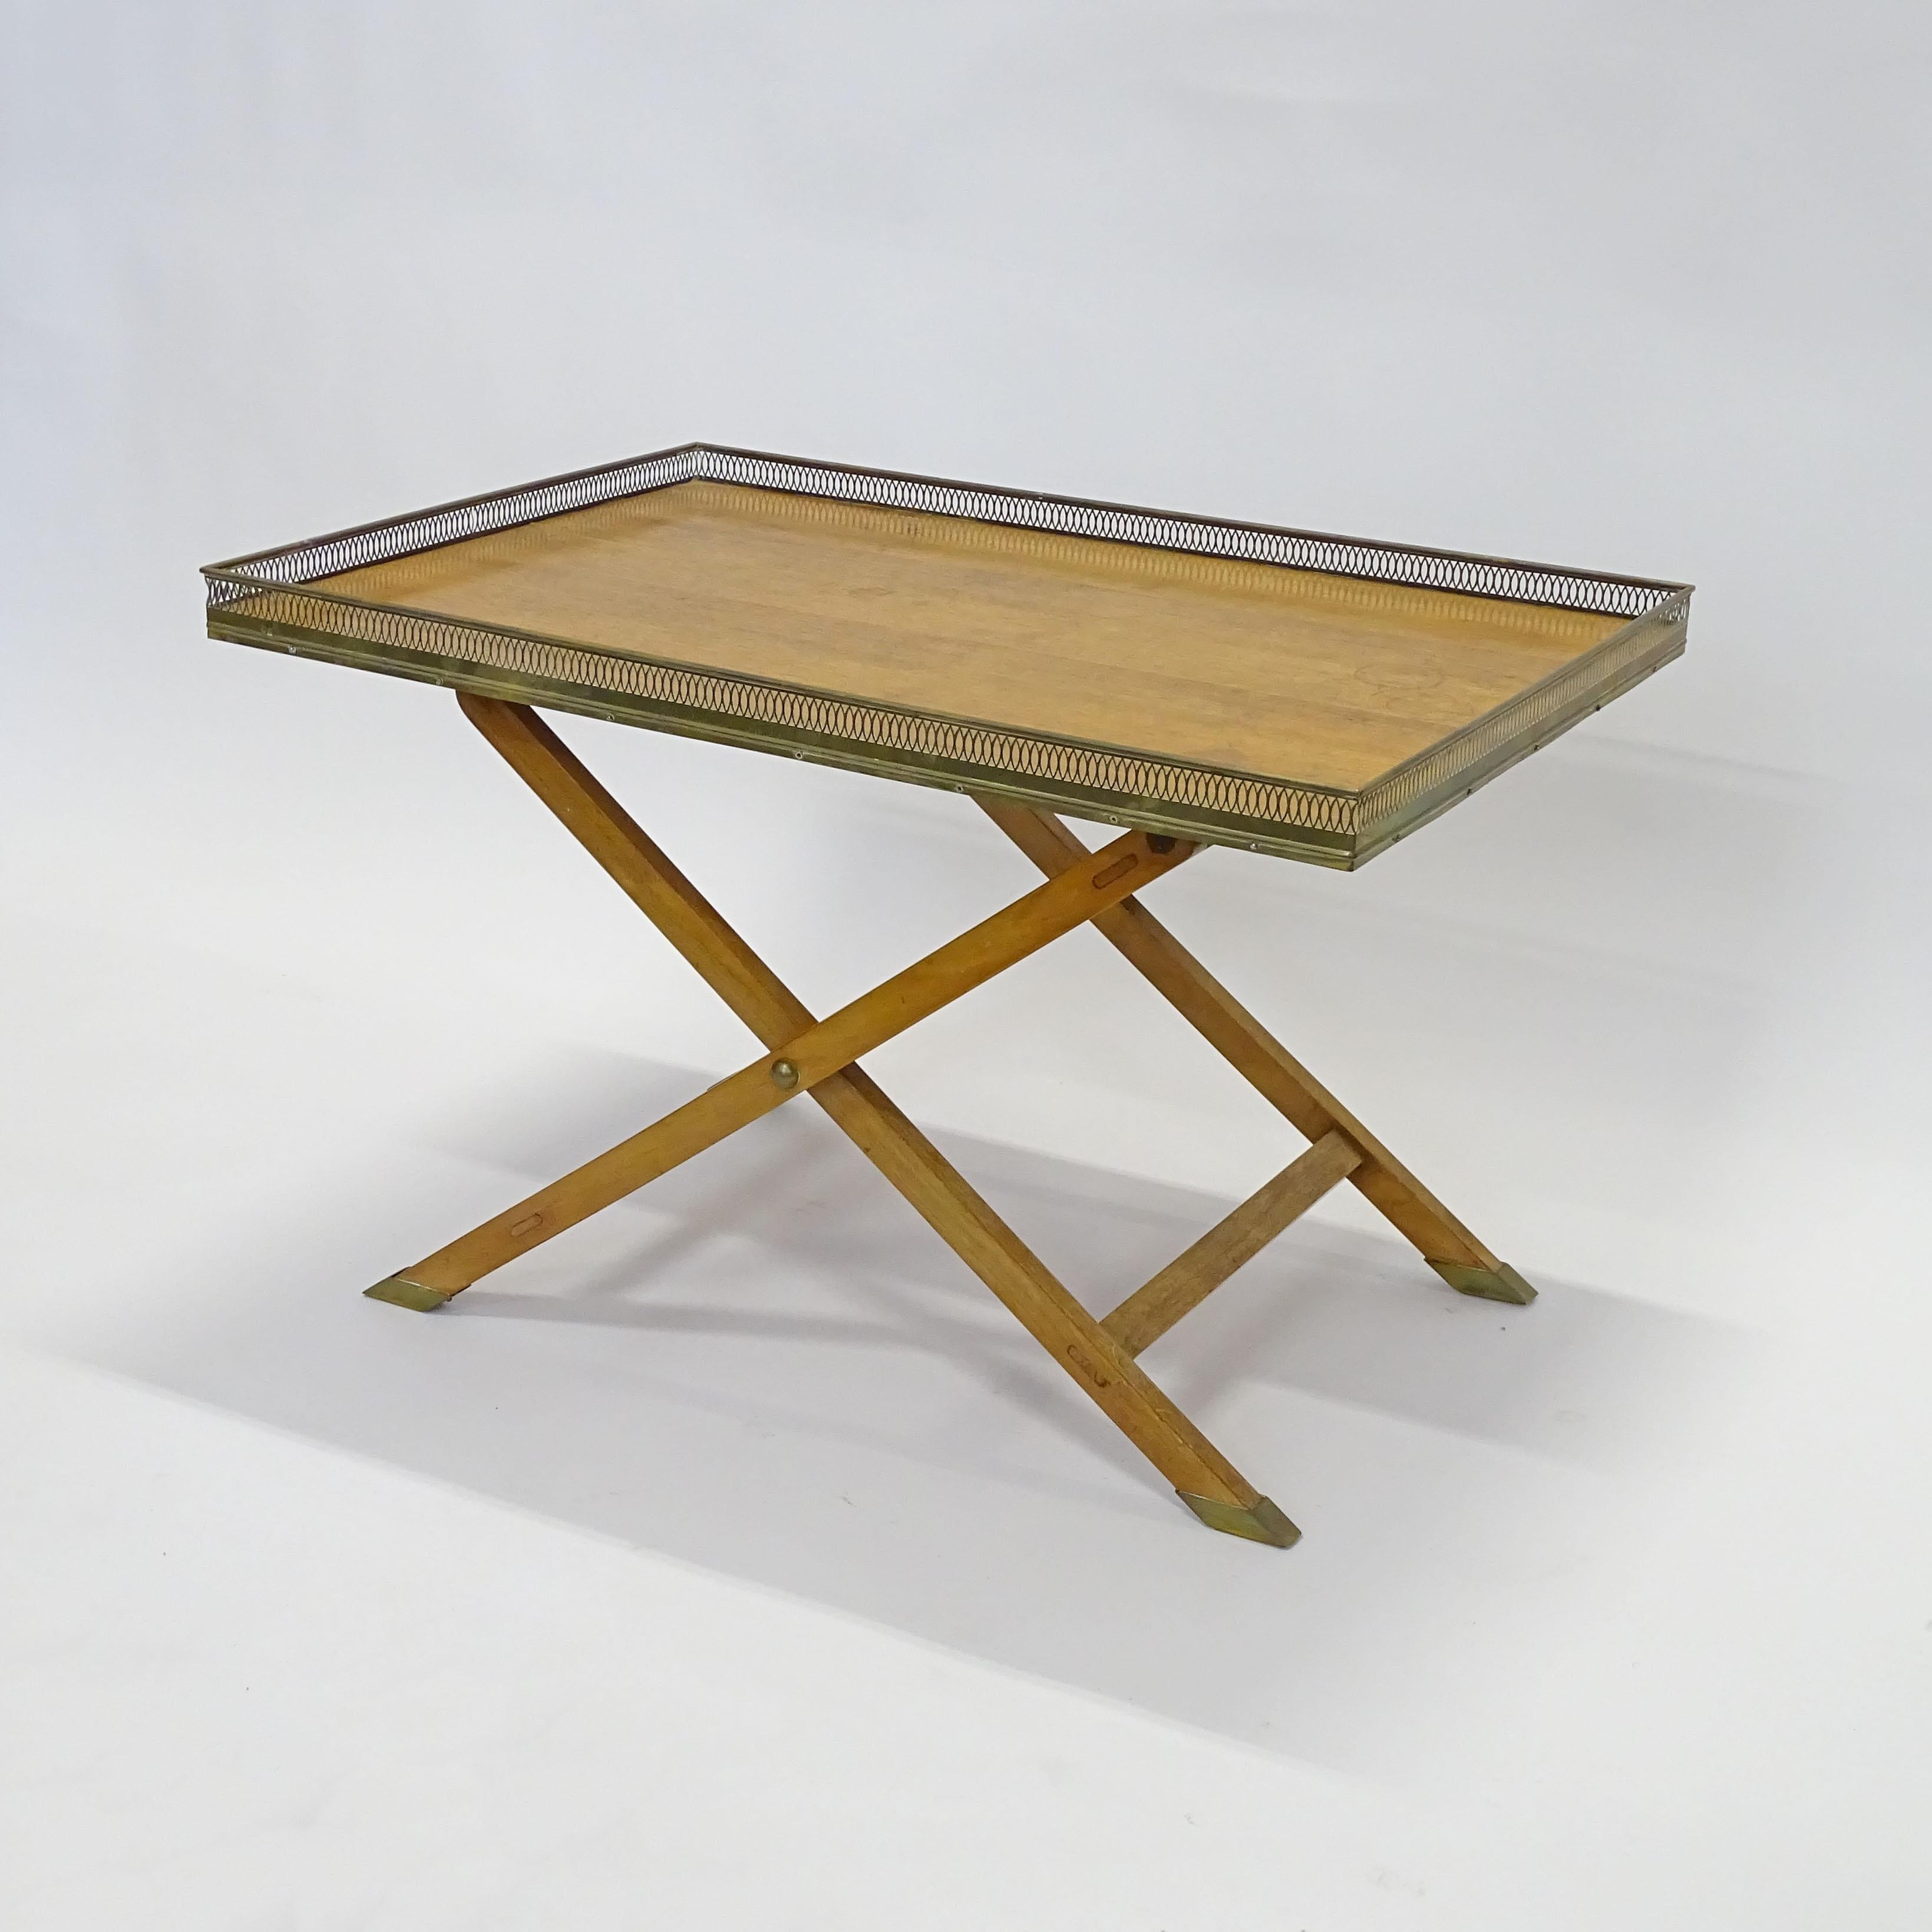 Splendid Wood and Brass Folding Coffee Table, 1950s For Sale 3